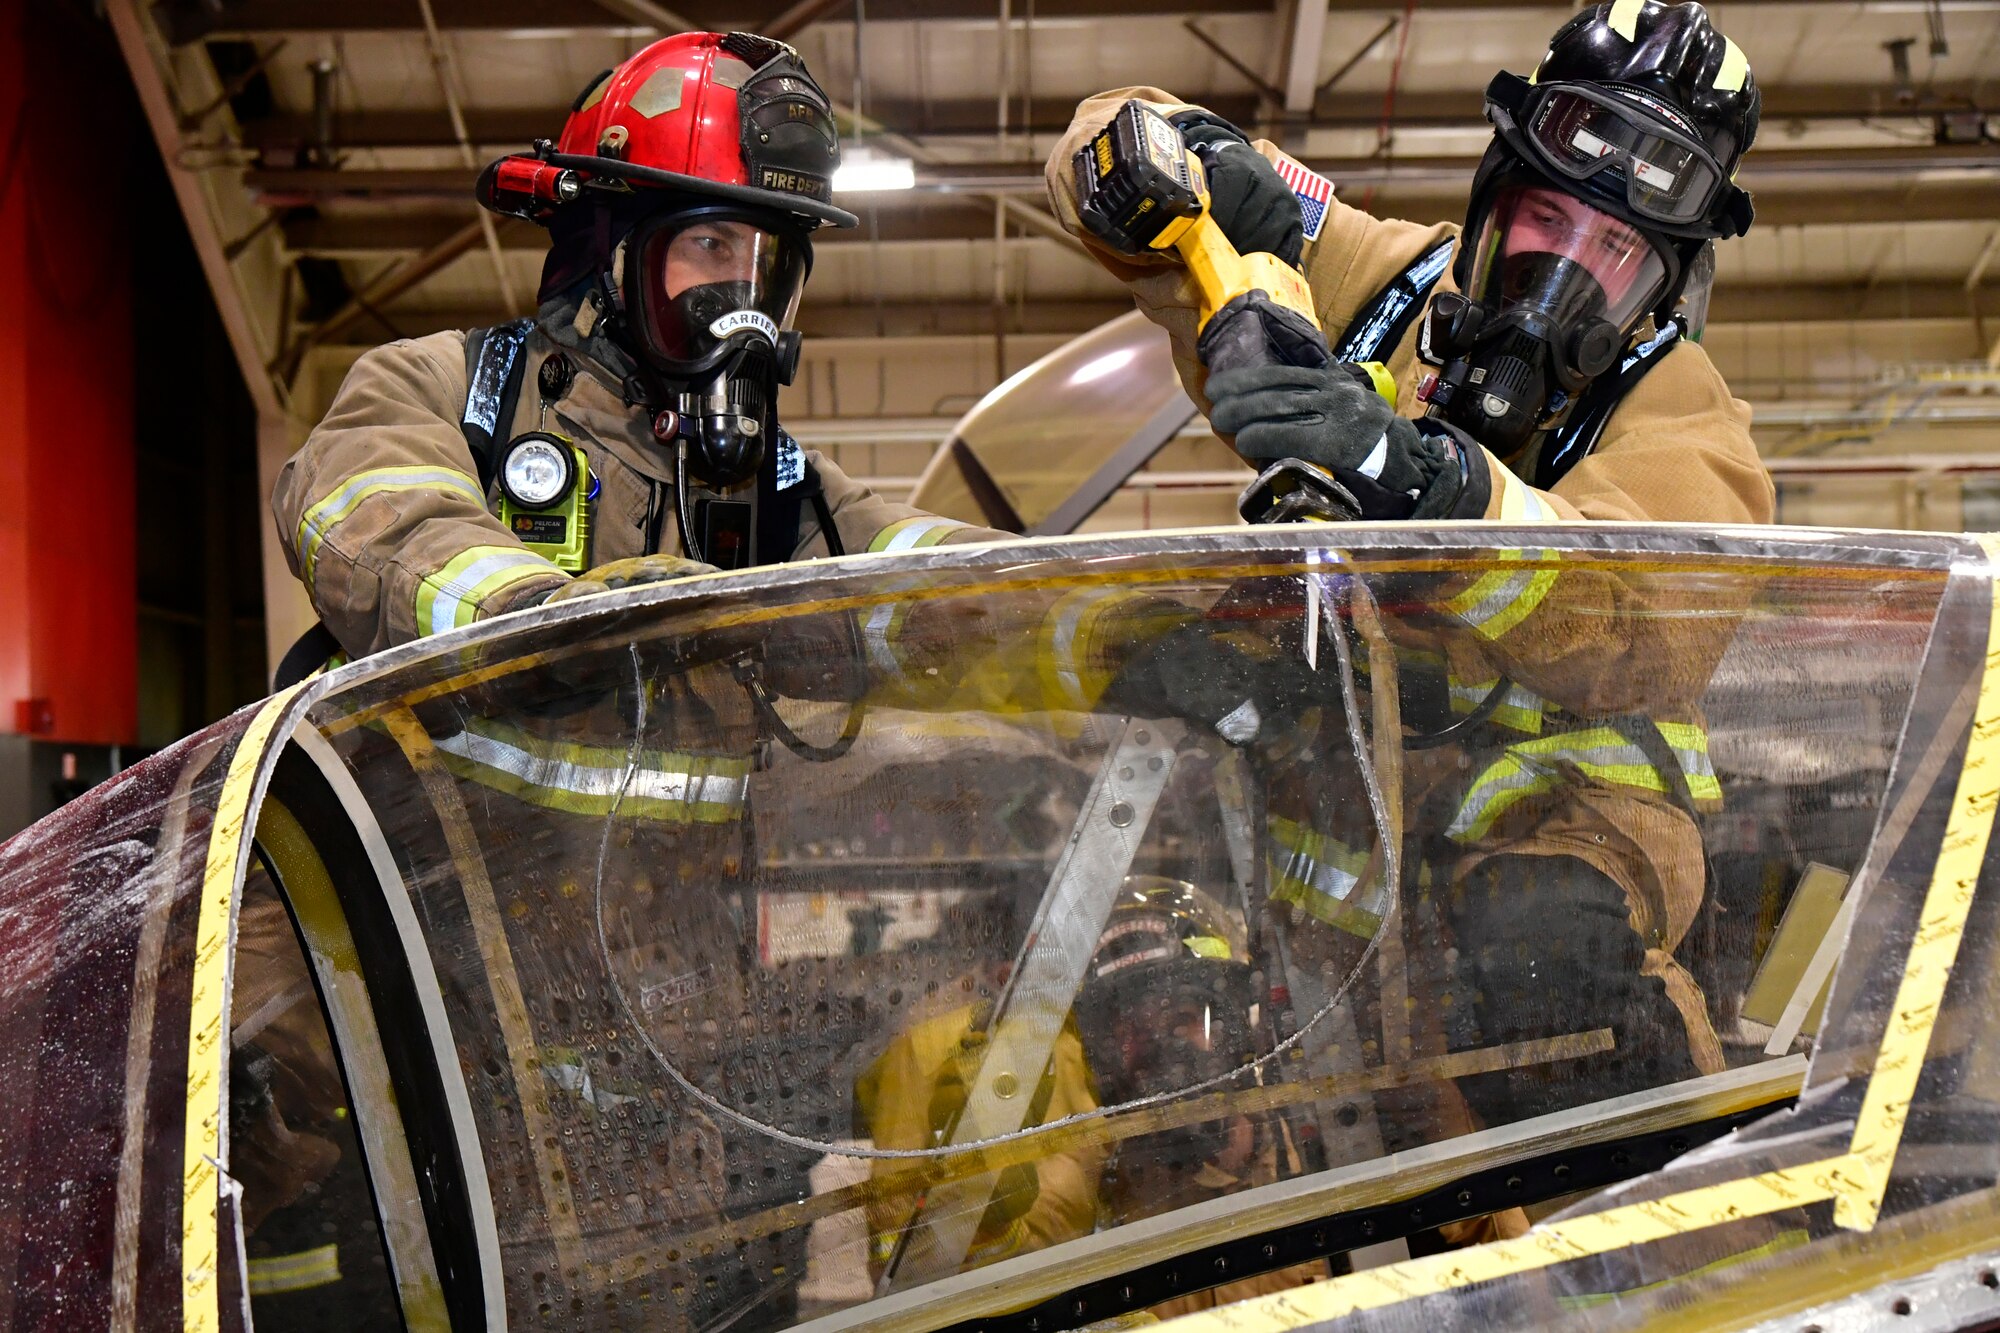 (Left to right) Chad Carrier, lead firefighter, and Airman 1st Class Joseph Brock, fire protection apprentice, both with 775th Civil Engineering Squadron Fire Department, practice cutting into a salvaged canopy for the purpose of emergency aircrew extraction Jan. 24, 2023, at Hill Air Force Base, Utah. This was one of several scenarios practiced during an emergency responder working group exercise attended by first responders from across the Air Force to explore emergency engine shutdown and aircrew extraction best practices specific to F-35 aircraft. (U.S. Air Force photo by Todd Cromar)